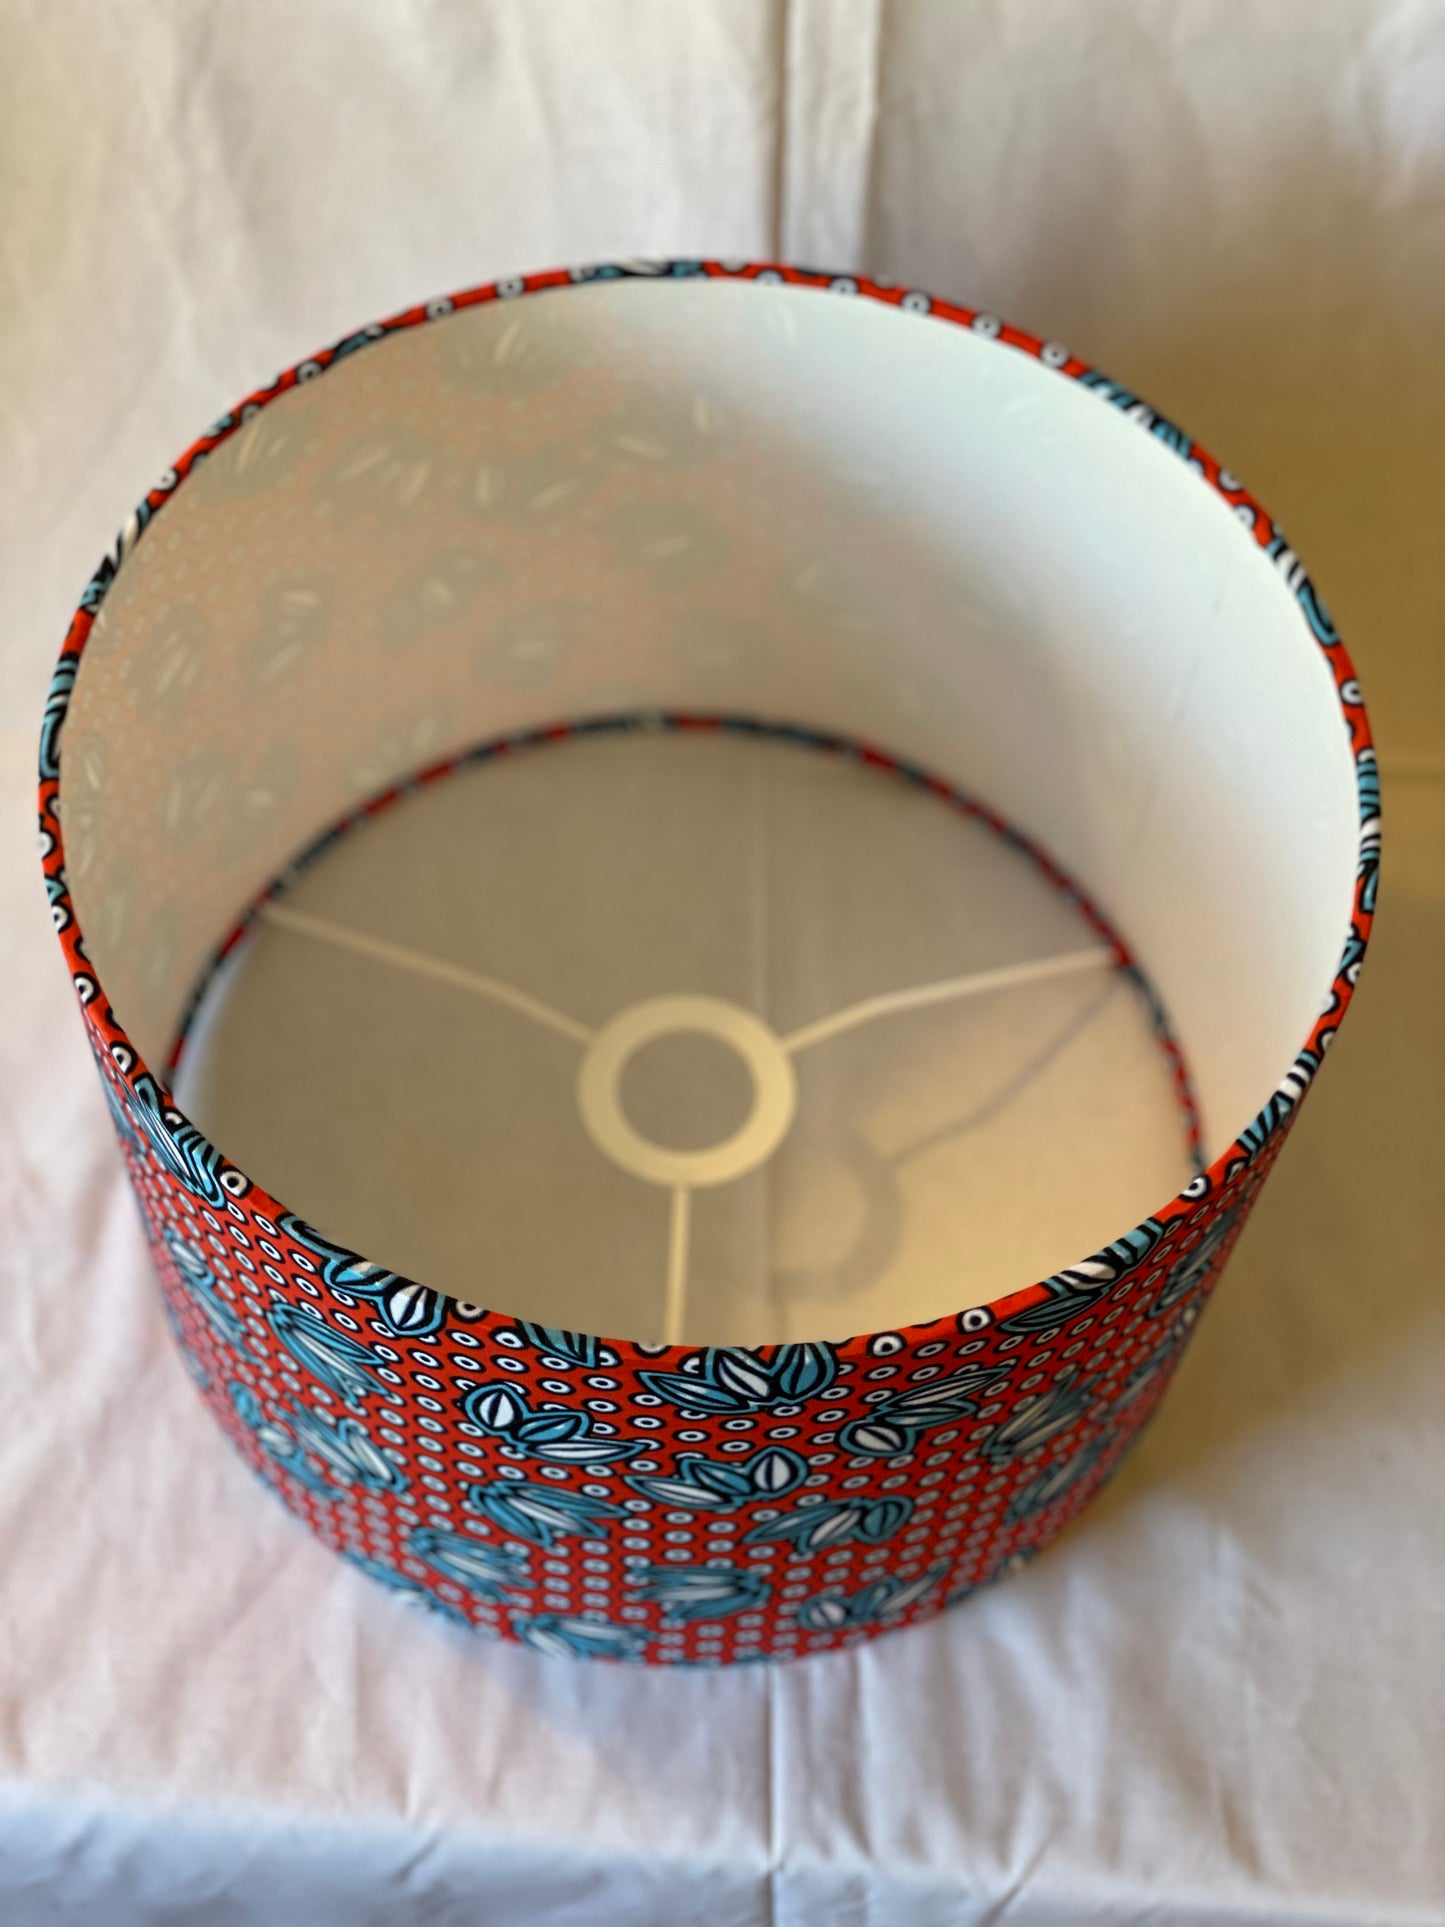 12 Inch Drum Shade. West African Ankara Fabric. Bright Red with Blue and White Floral and Circular Detail.